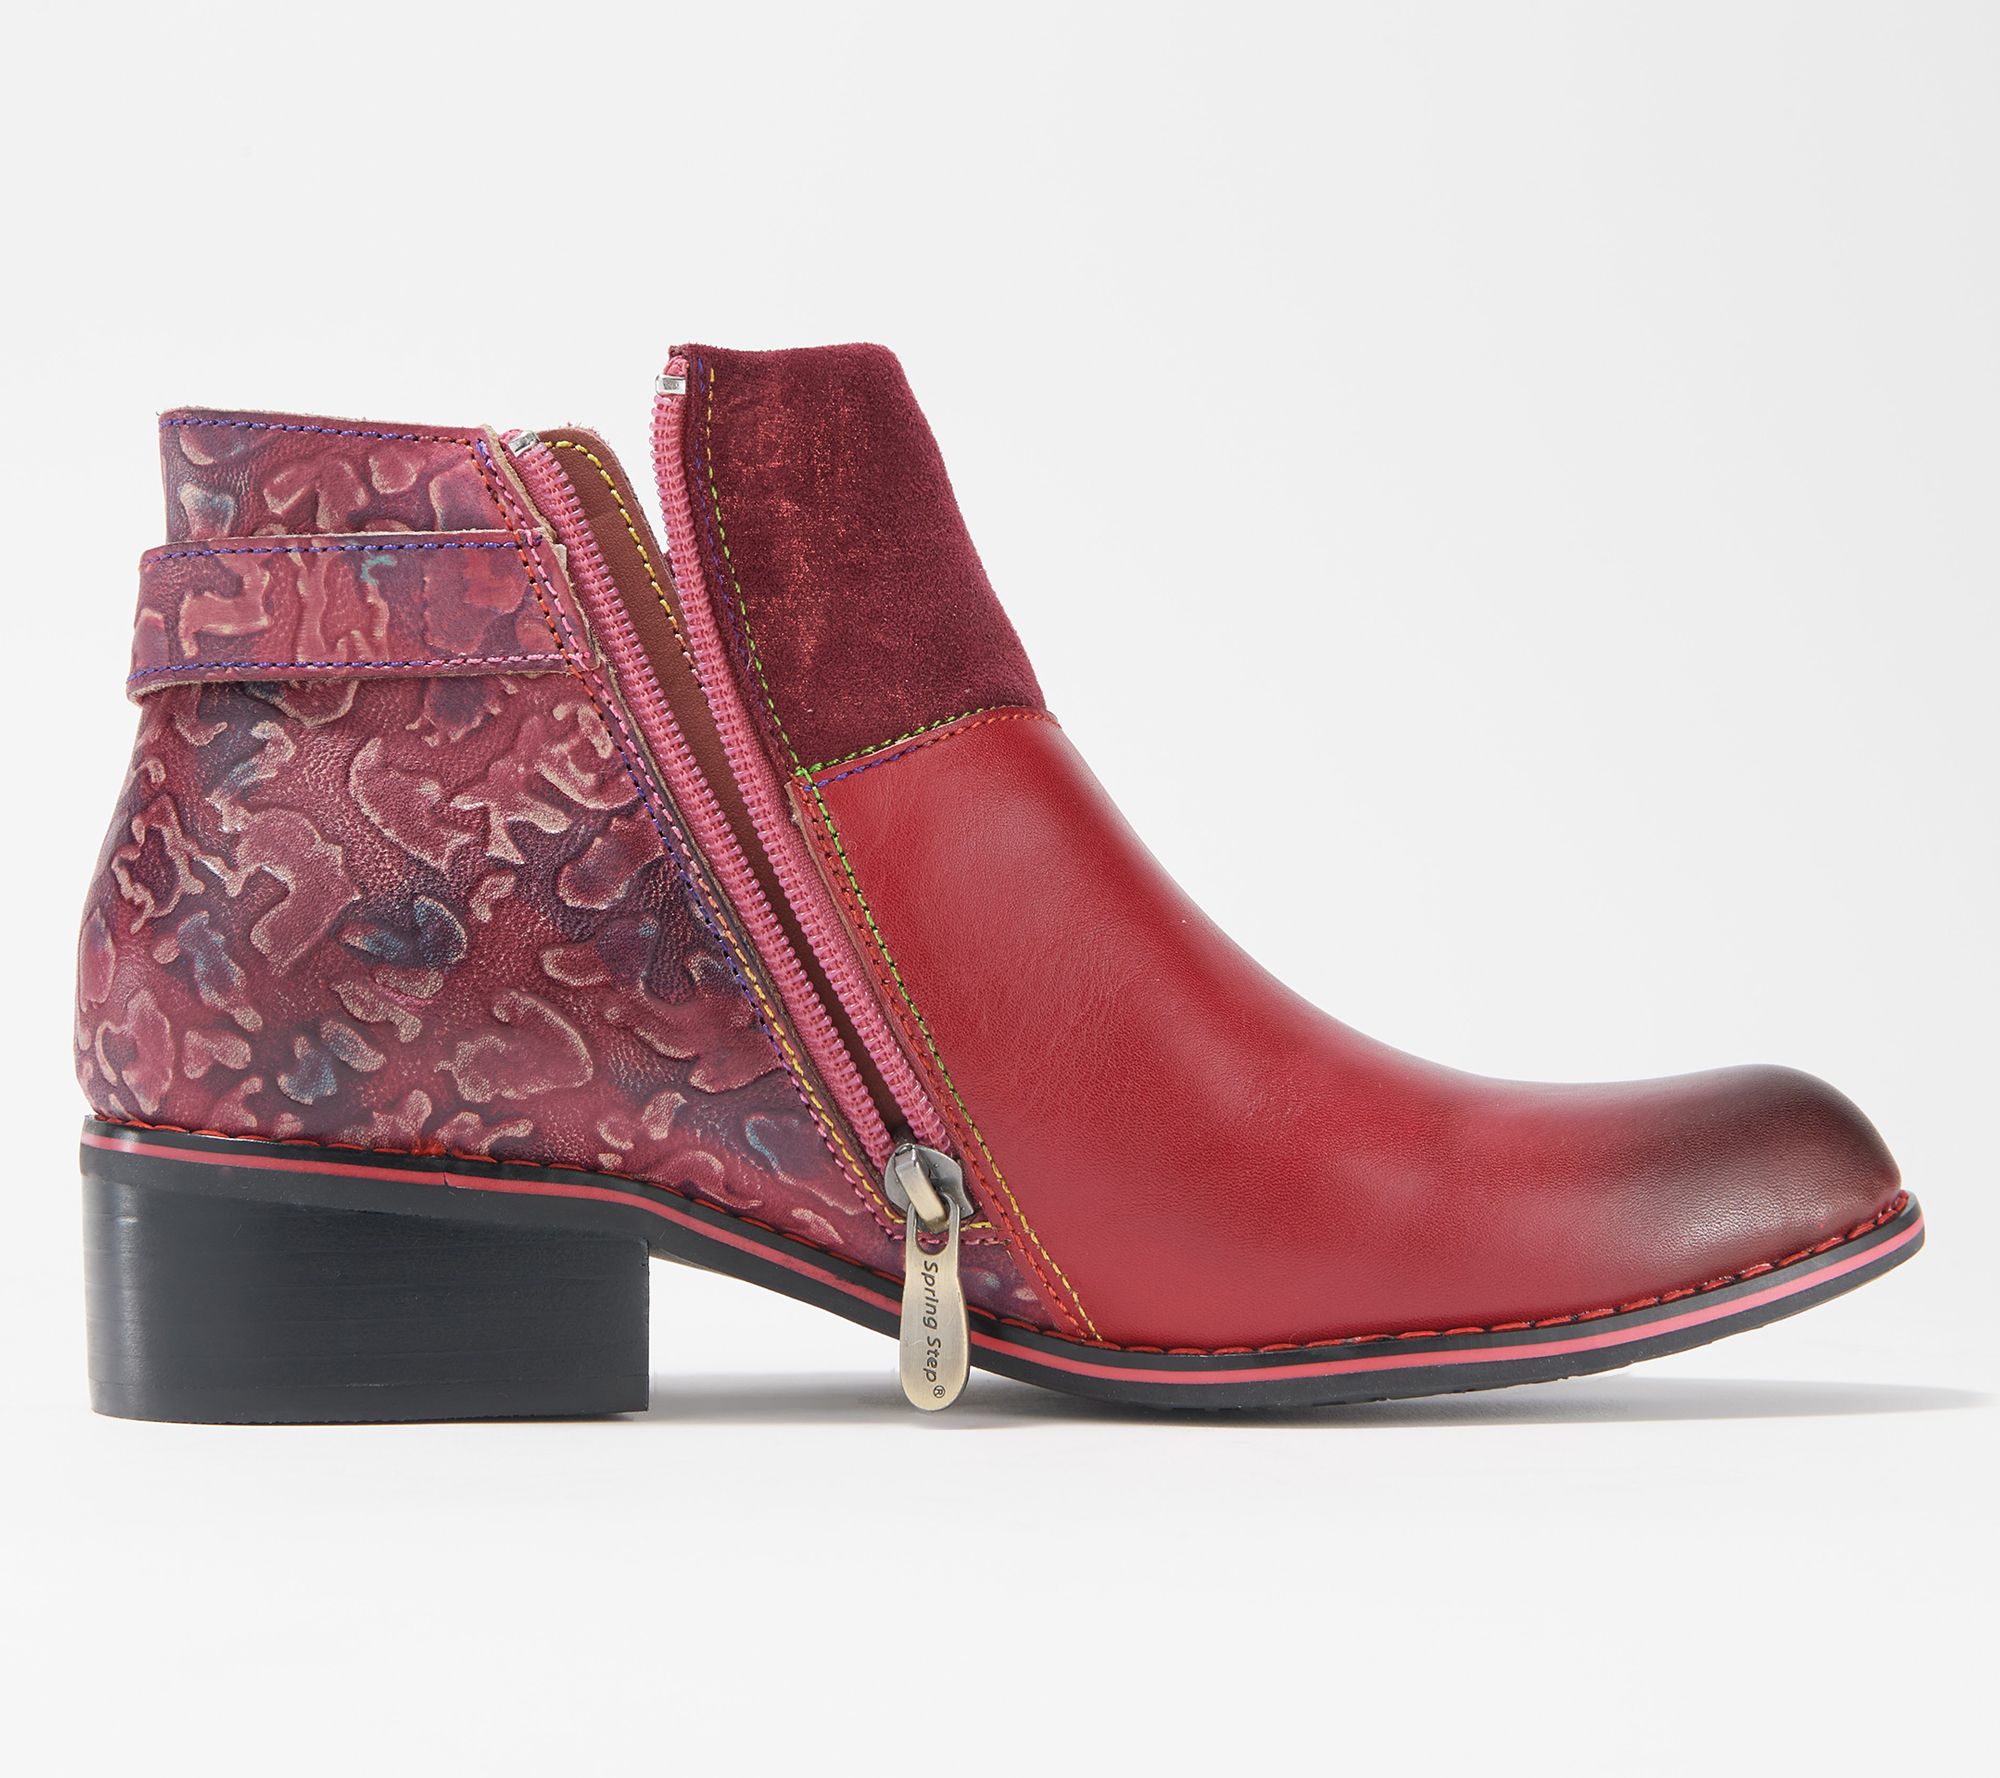 L'Artiste by Spring Step Leather Buckle Ankle Boots - Tiatia - QVC.com